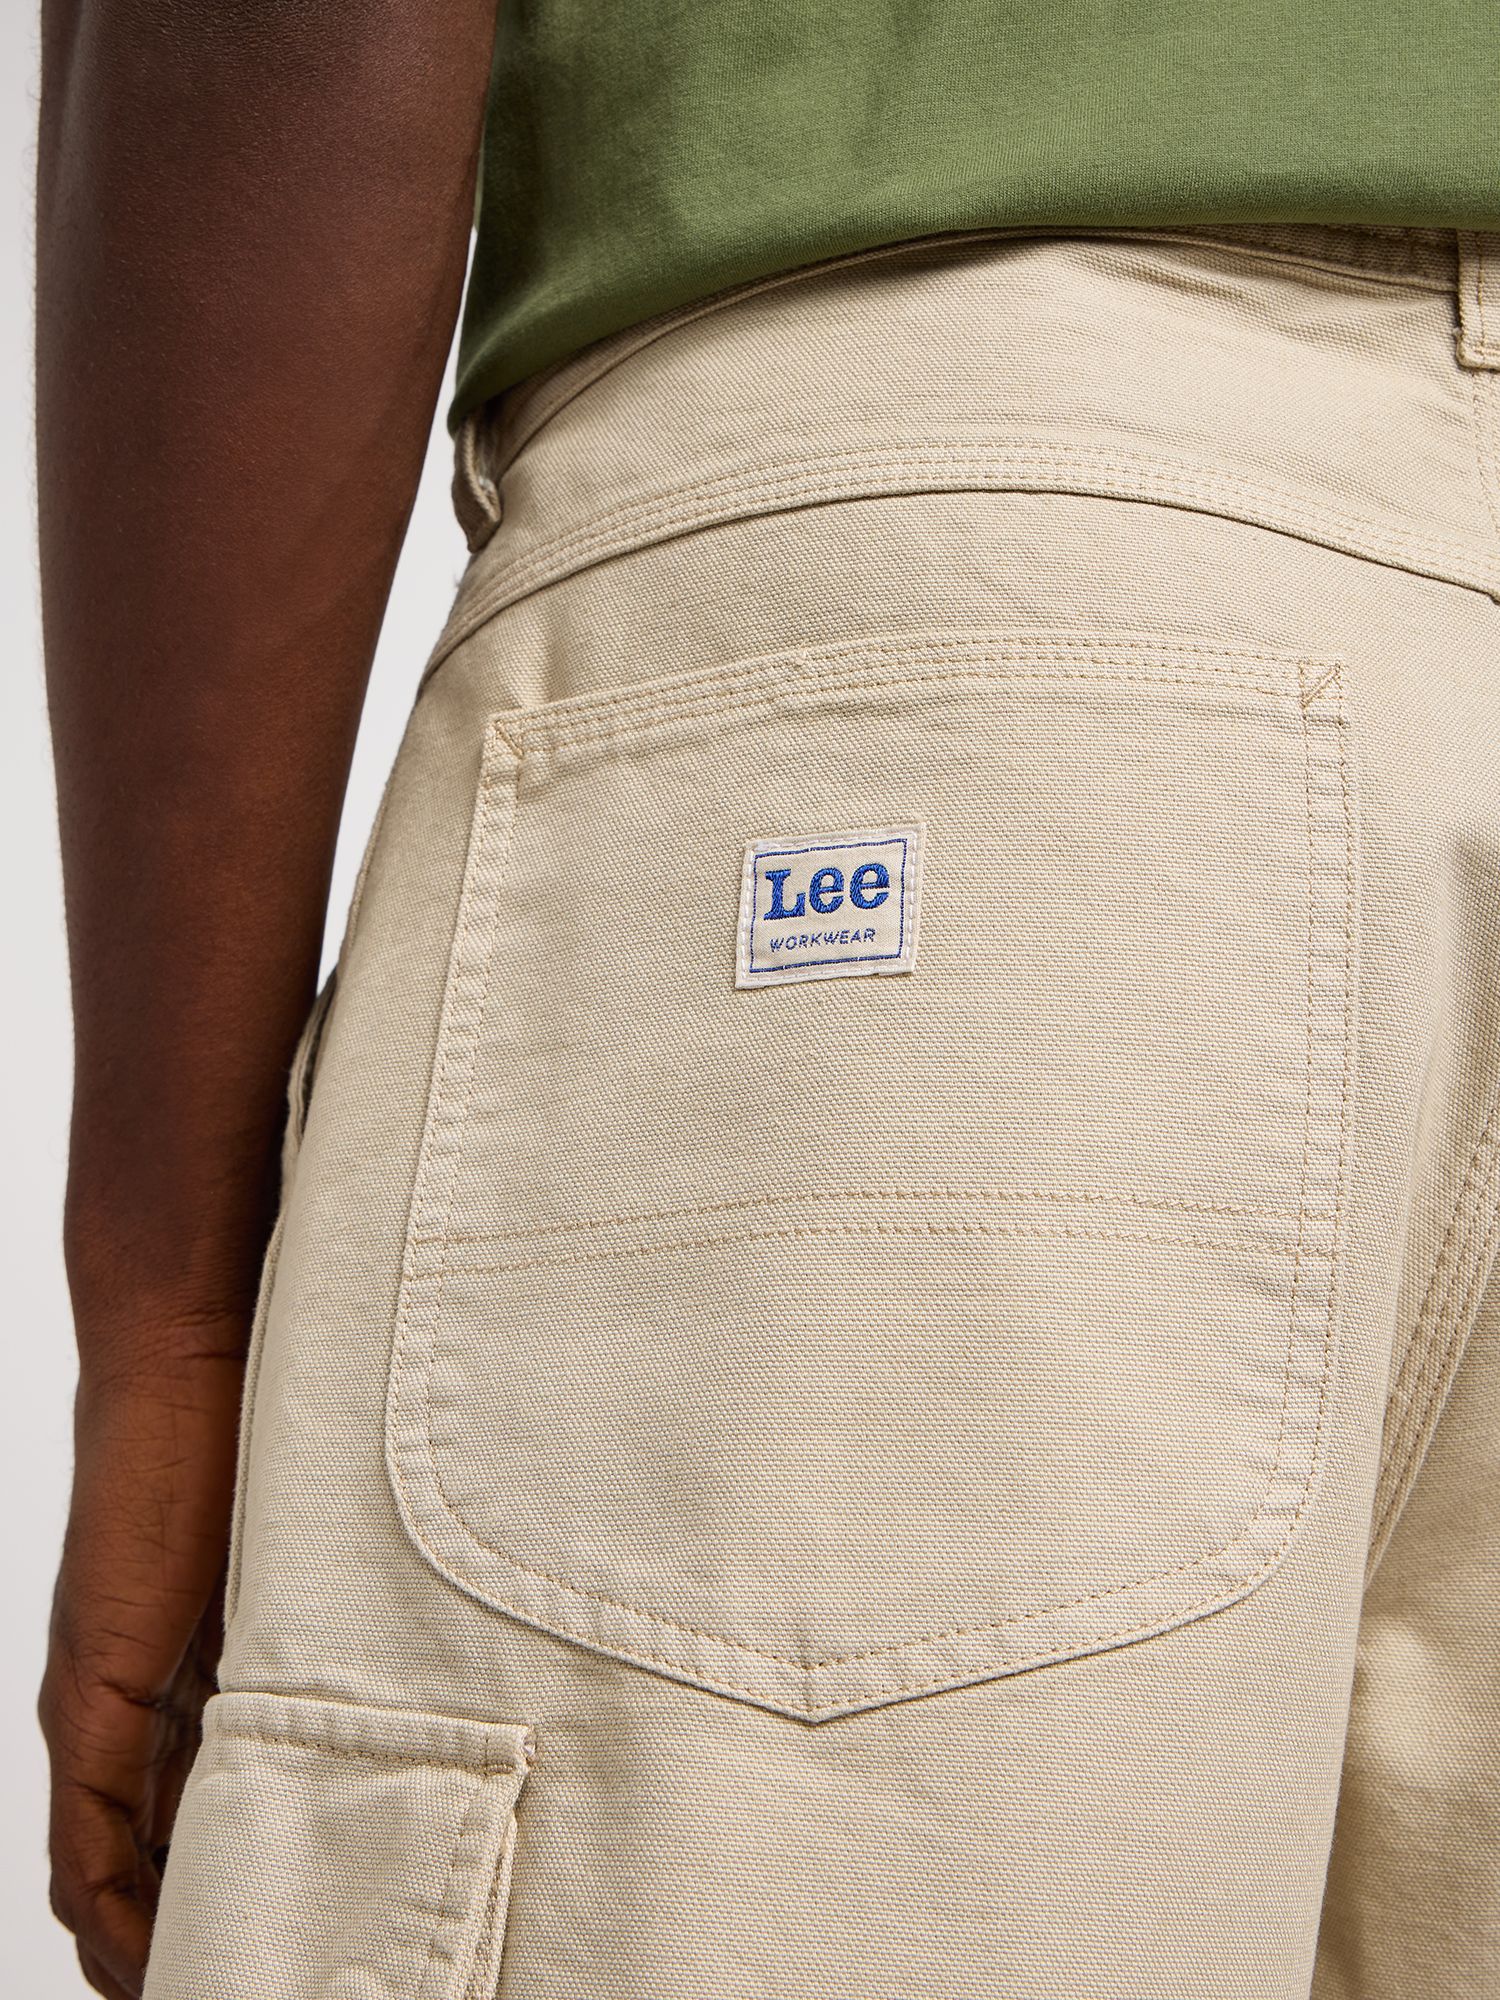 Buy Lee Canvas Cargo Shorts, Stone Online at johnlewis.com